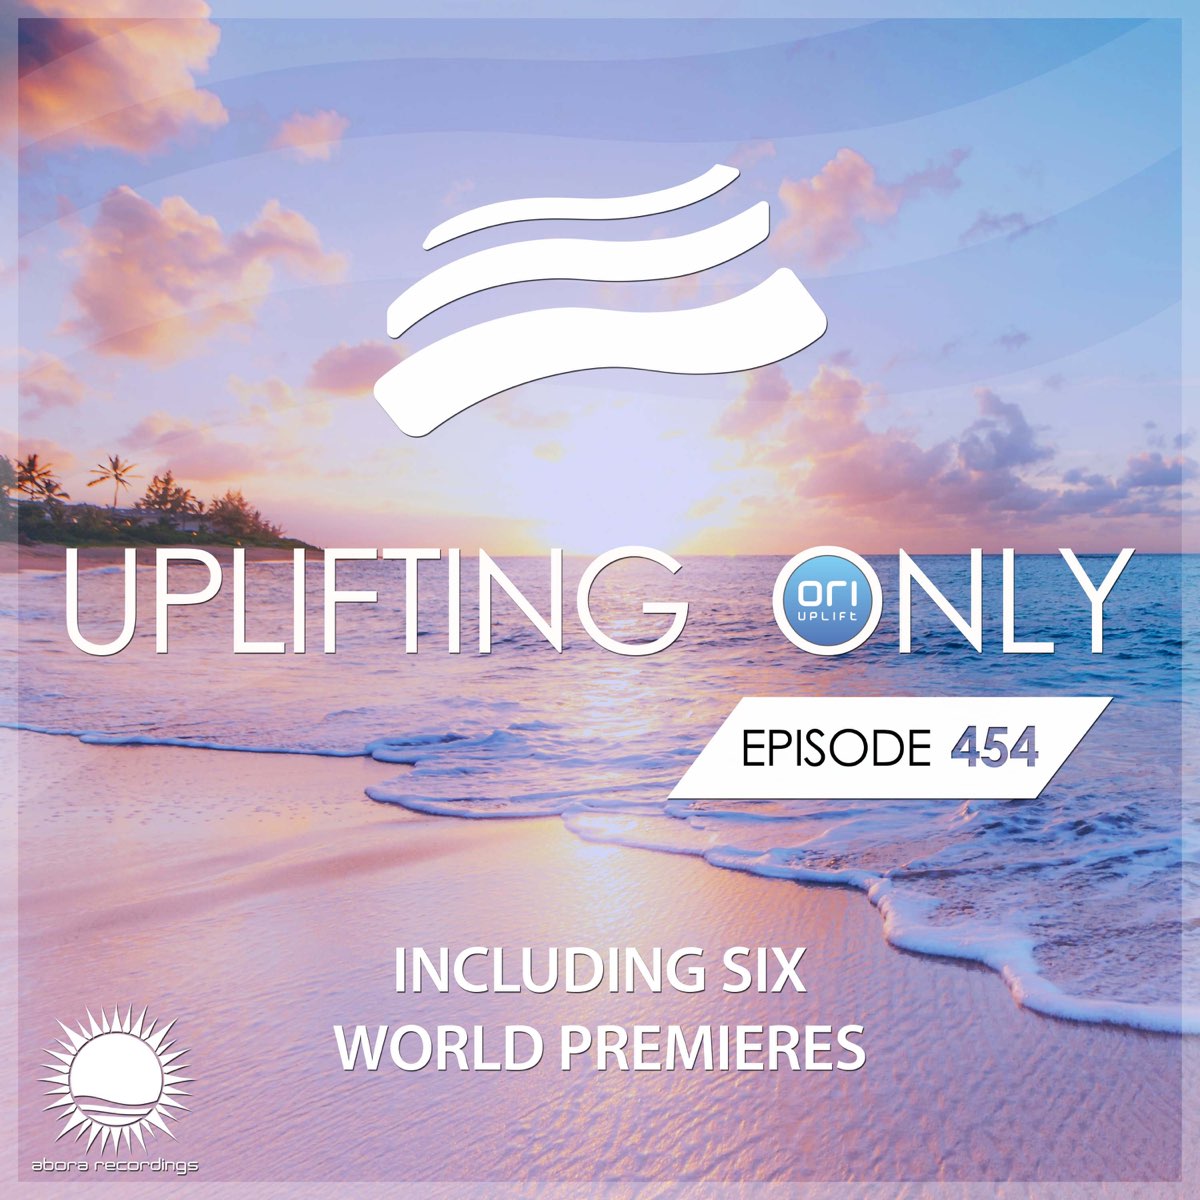 Ori uplift Uplifting only. Ori uplift - Uplifting only 049. Ori Uplifting only 536. Ori uplift - Uplifting only 049 (2014-01-15). Only ep